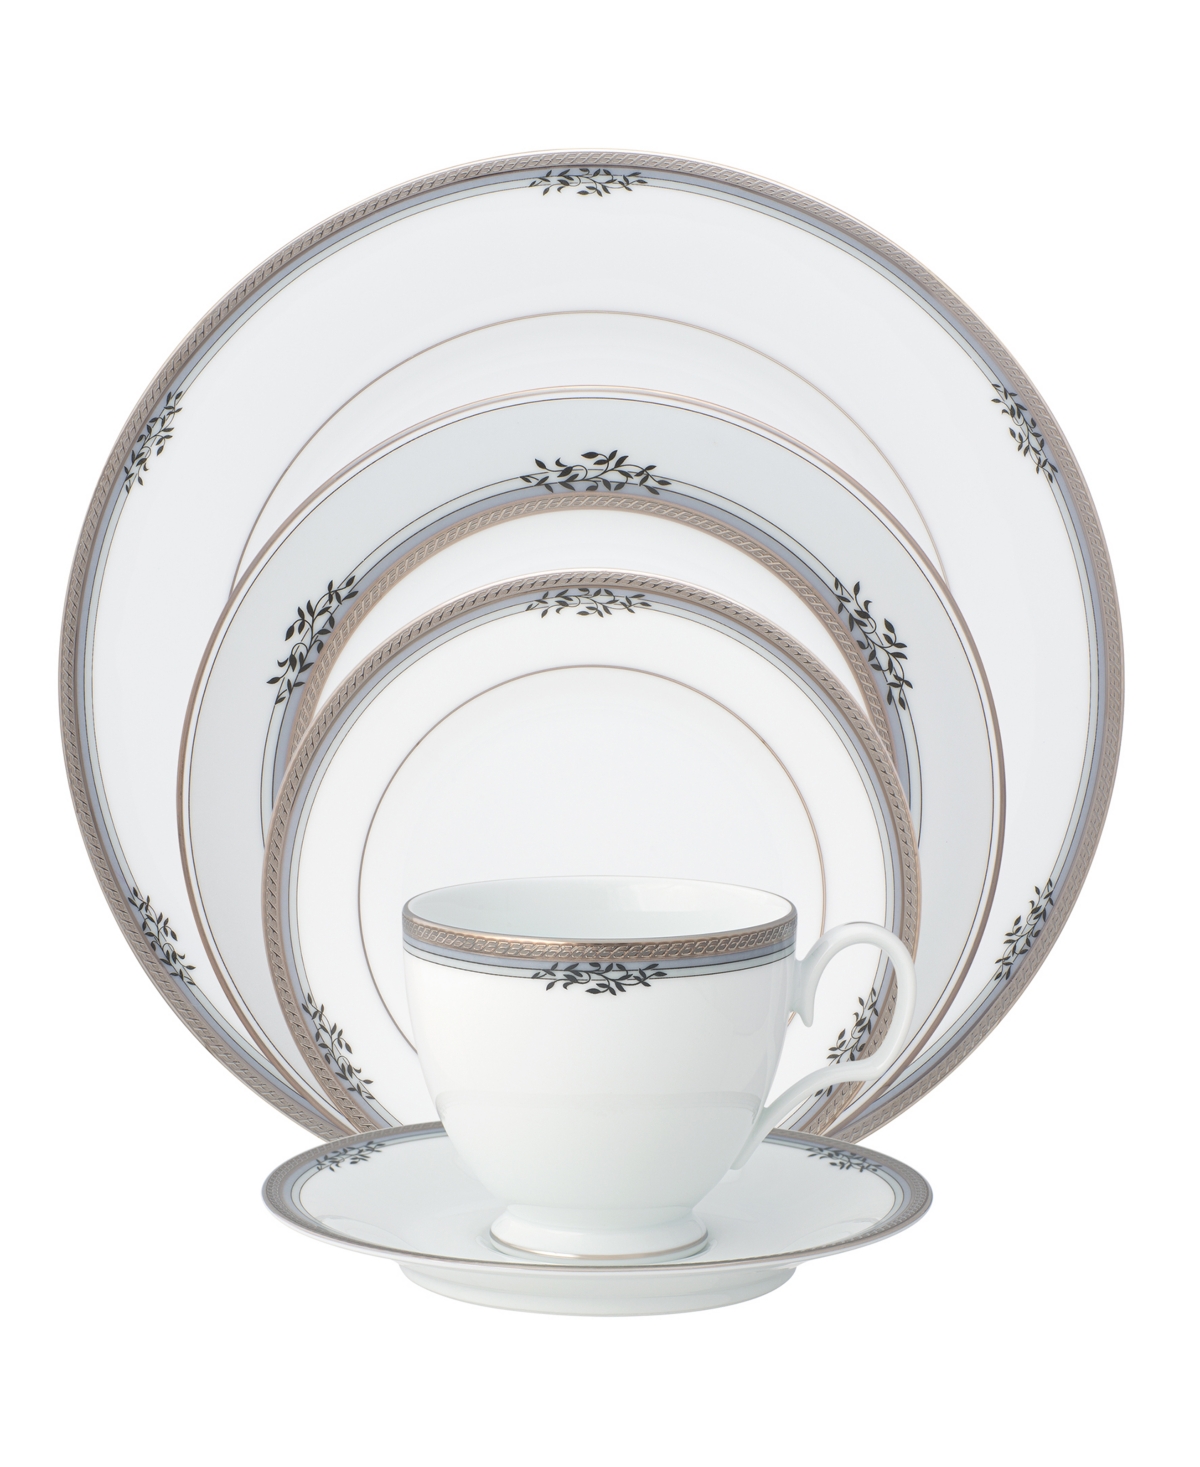 Noritake Laurelvale 5 Piece Place Setting In White